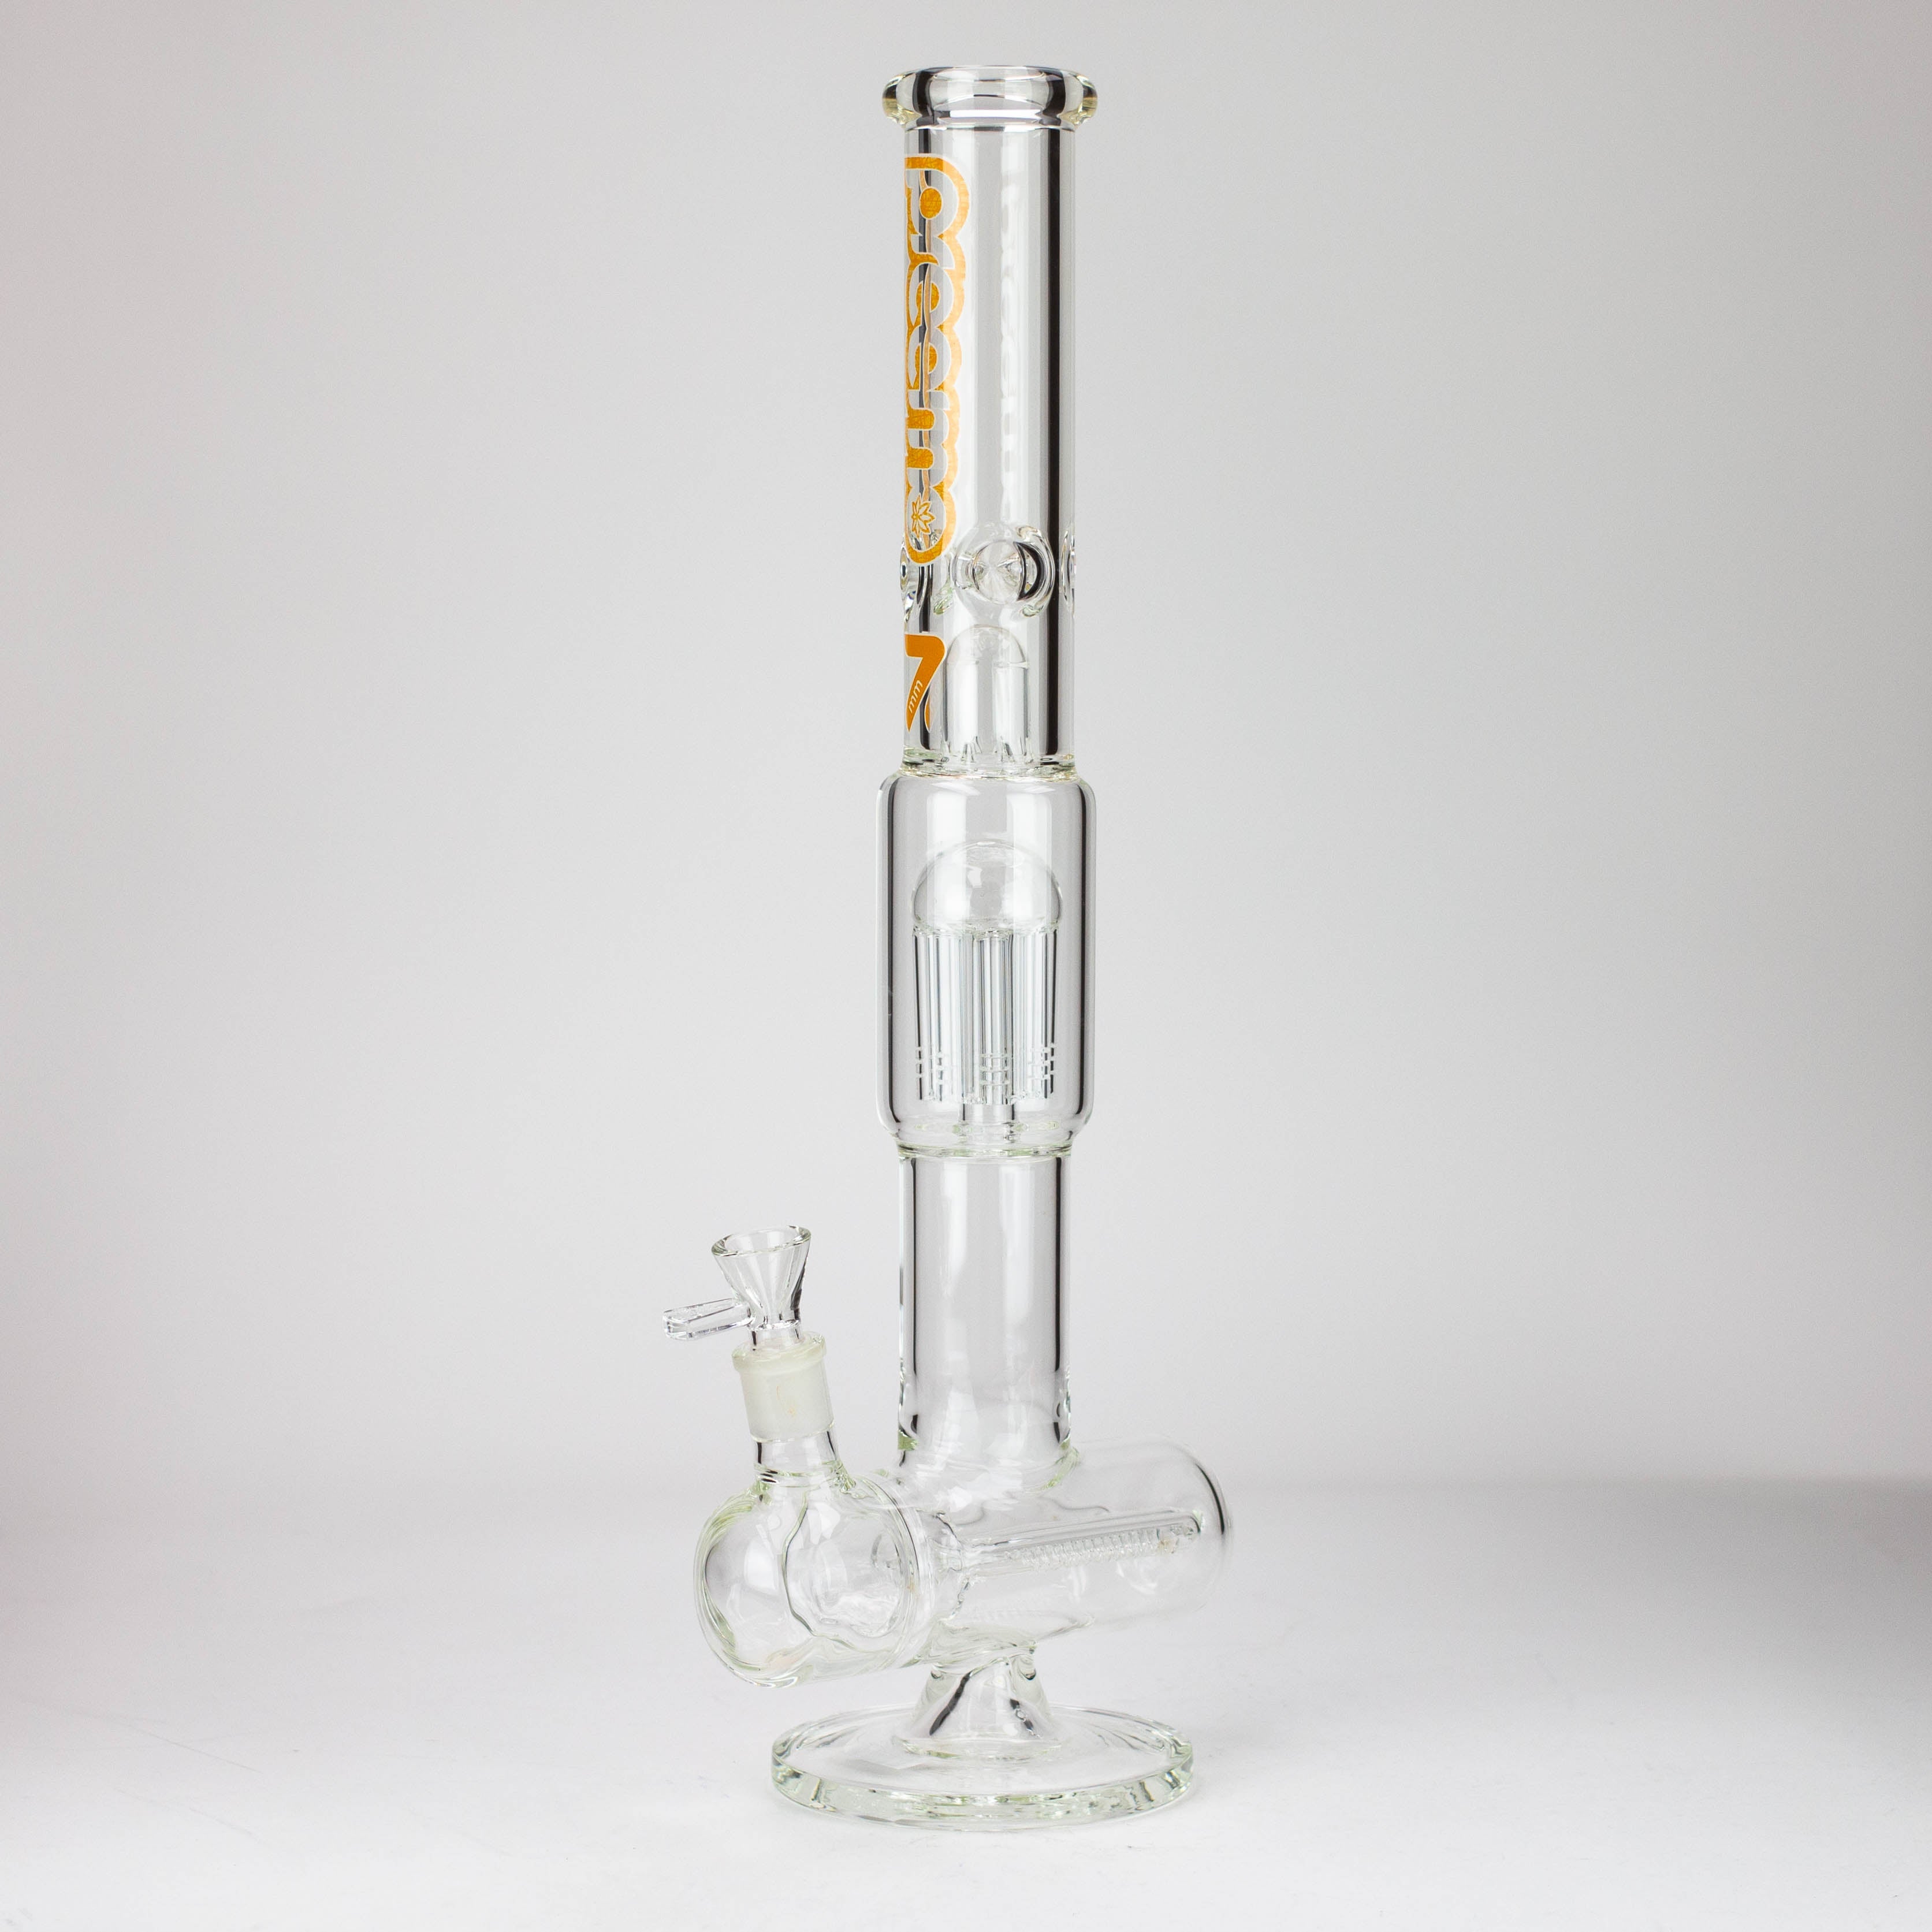 preemo - 20 inch Dome Over Triple Inline to Tree Perc_12